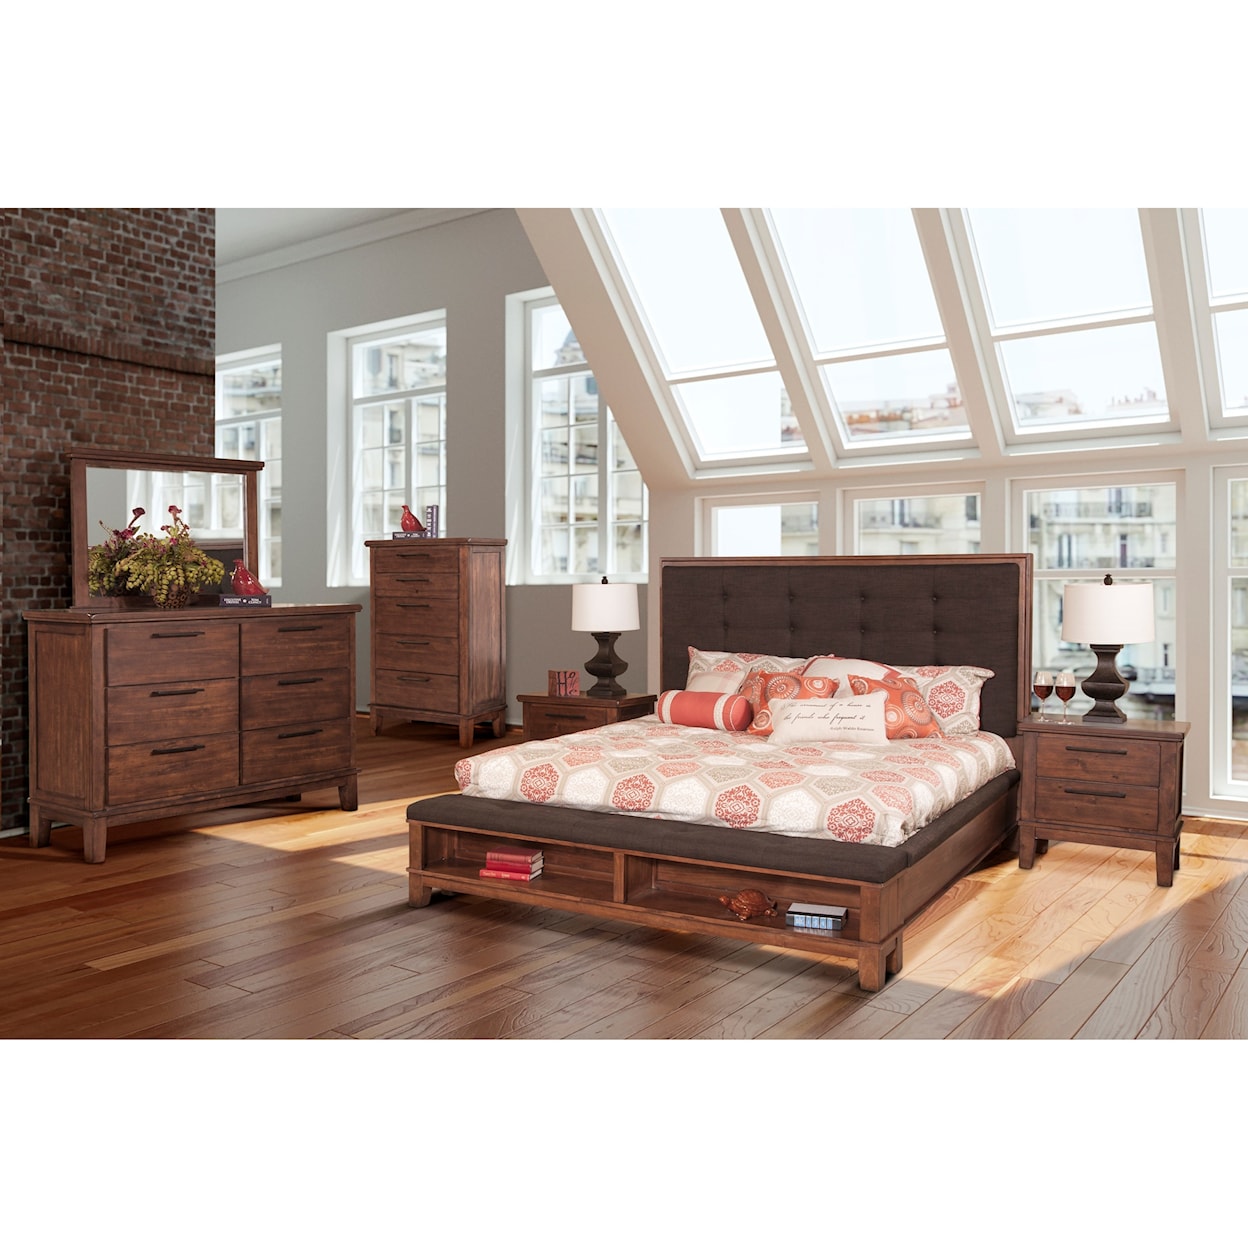 New Classic Furniture Cagney California King Bedroom Group